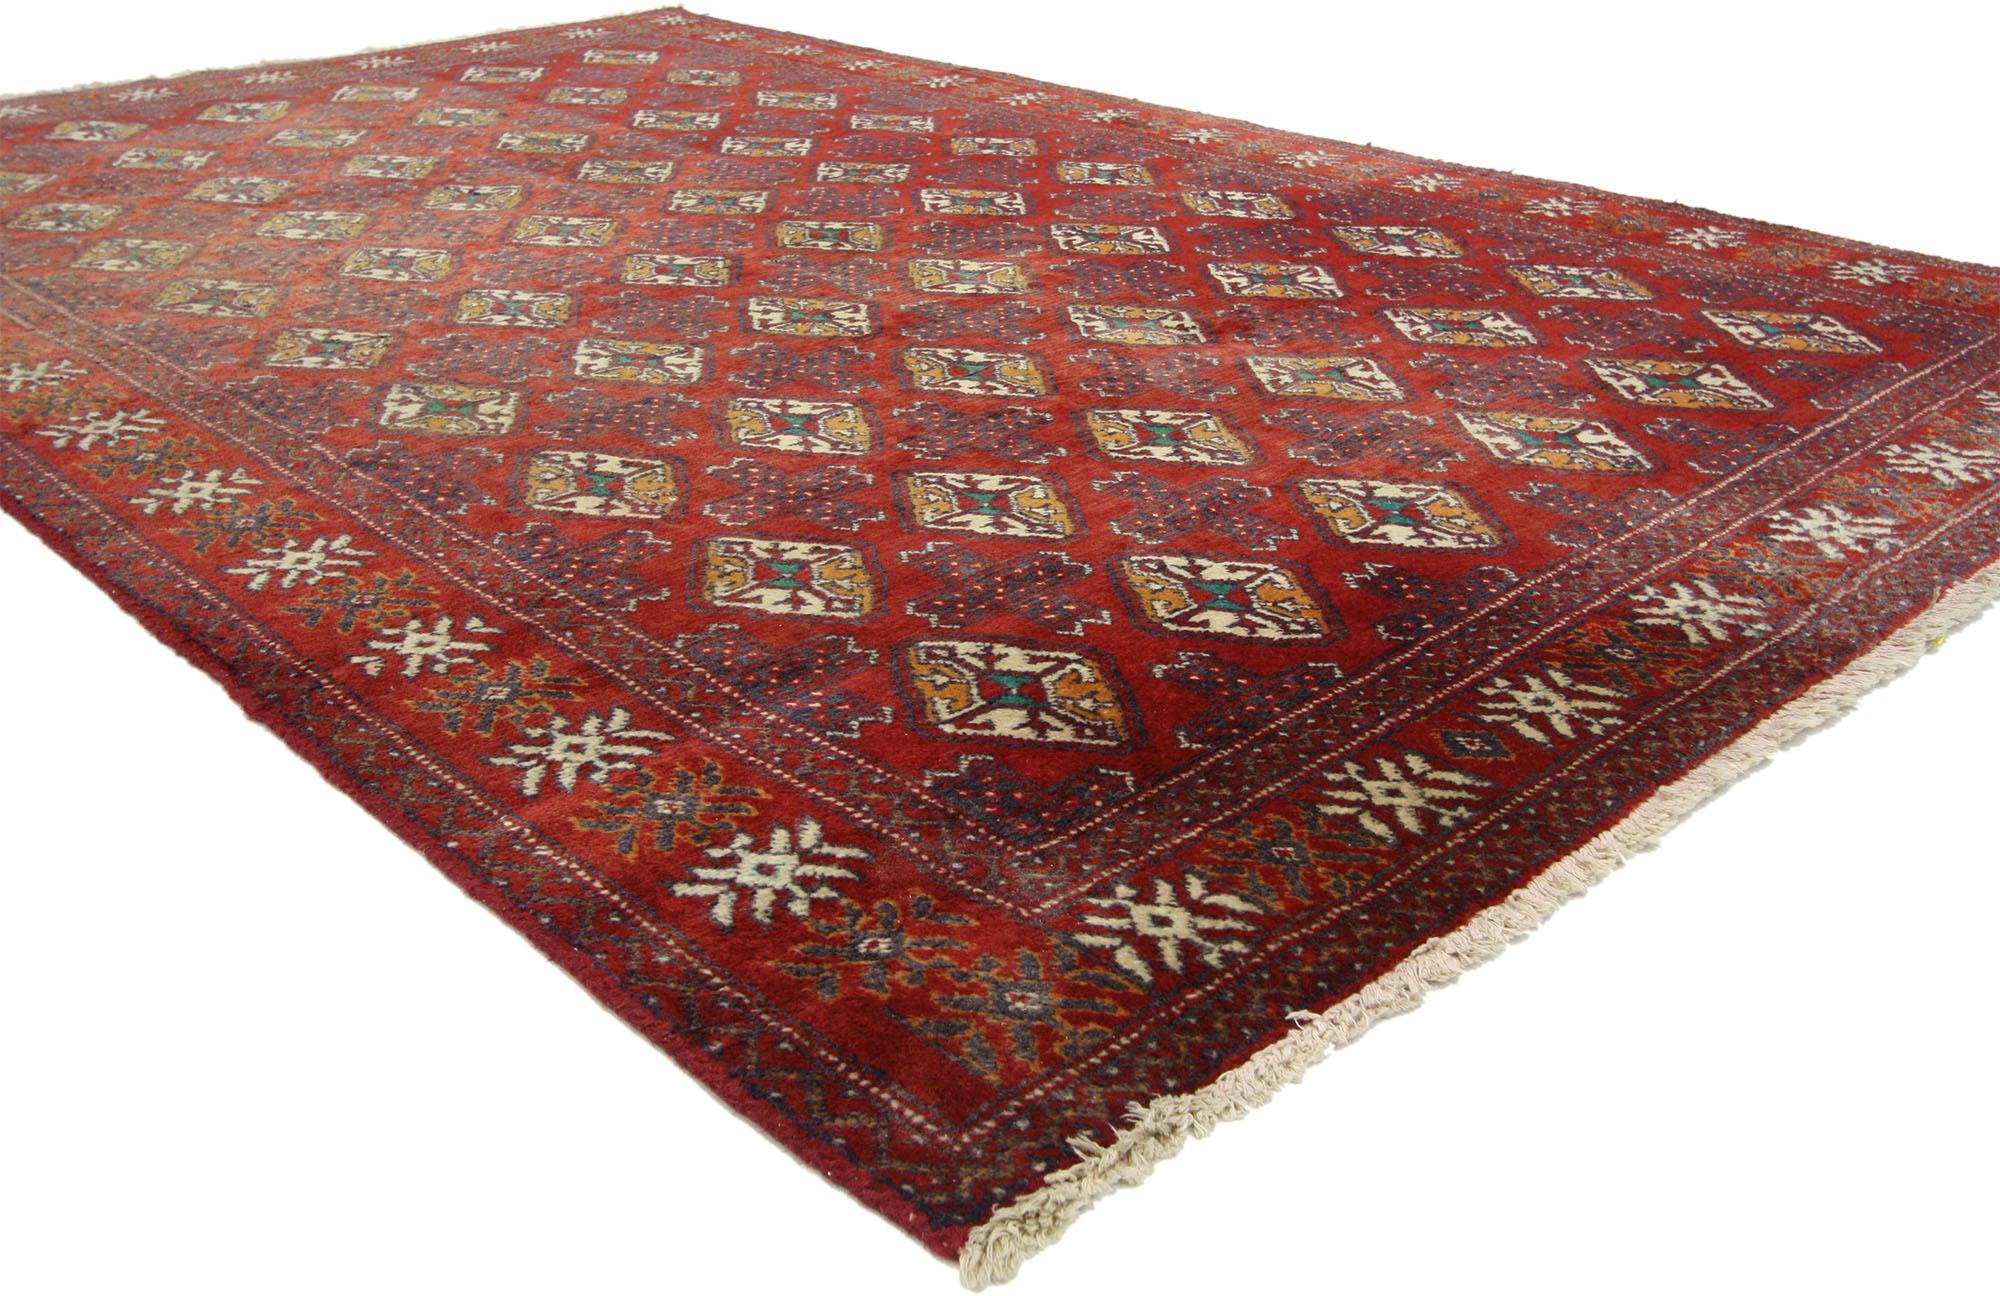 77159, vintage Turkmen rug with traditional style, Tekke Accent rug. This hand-knotted wool vintage Turkmen rug features six vertical columns of the Tekke gül with secondary cruciform (cross-like) güls used by Turkoman tribes. Framed by Classic